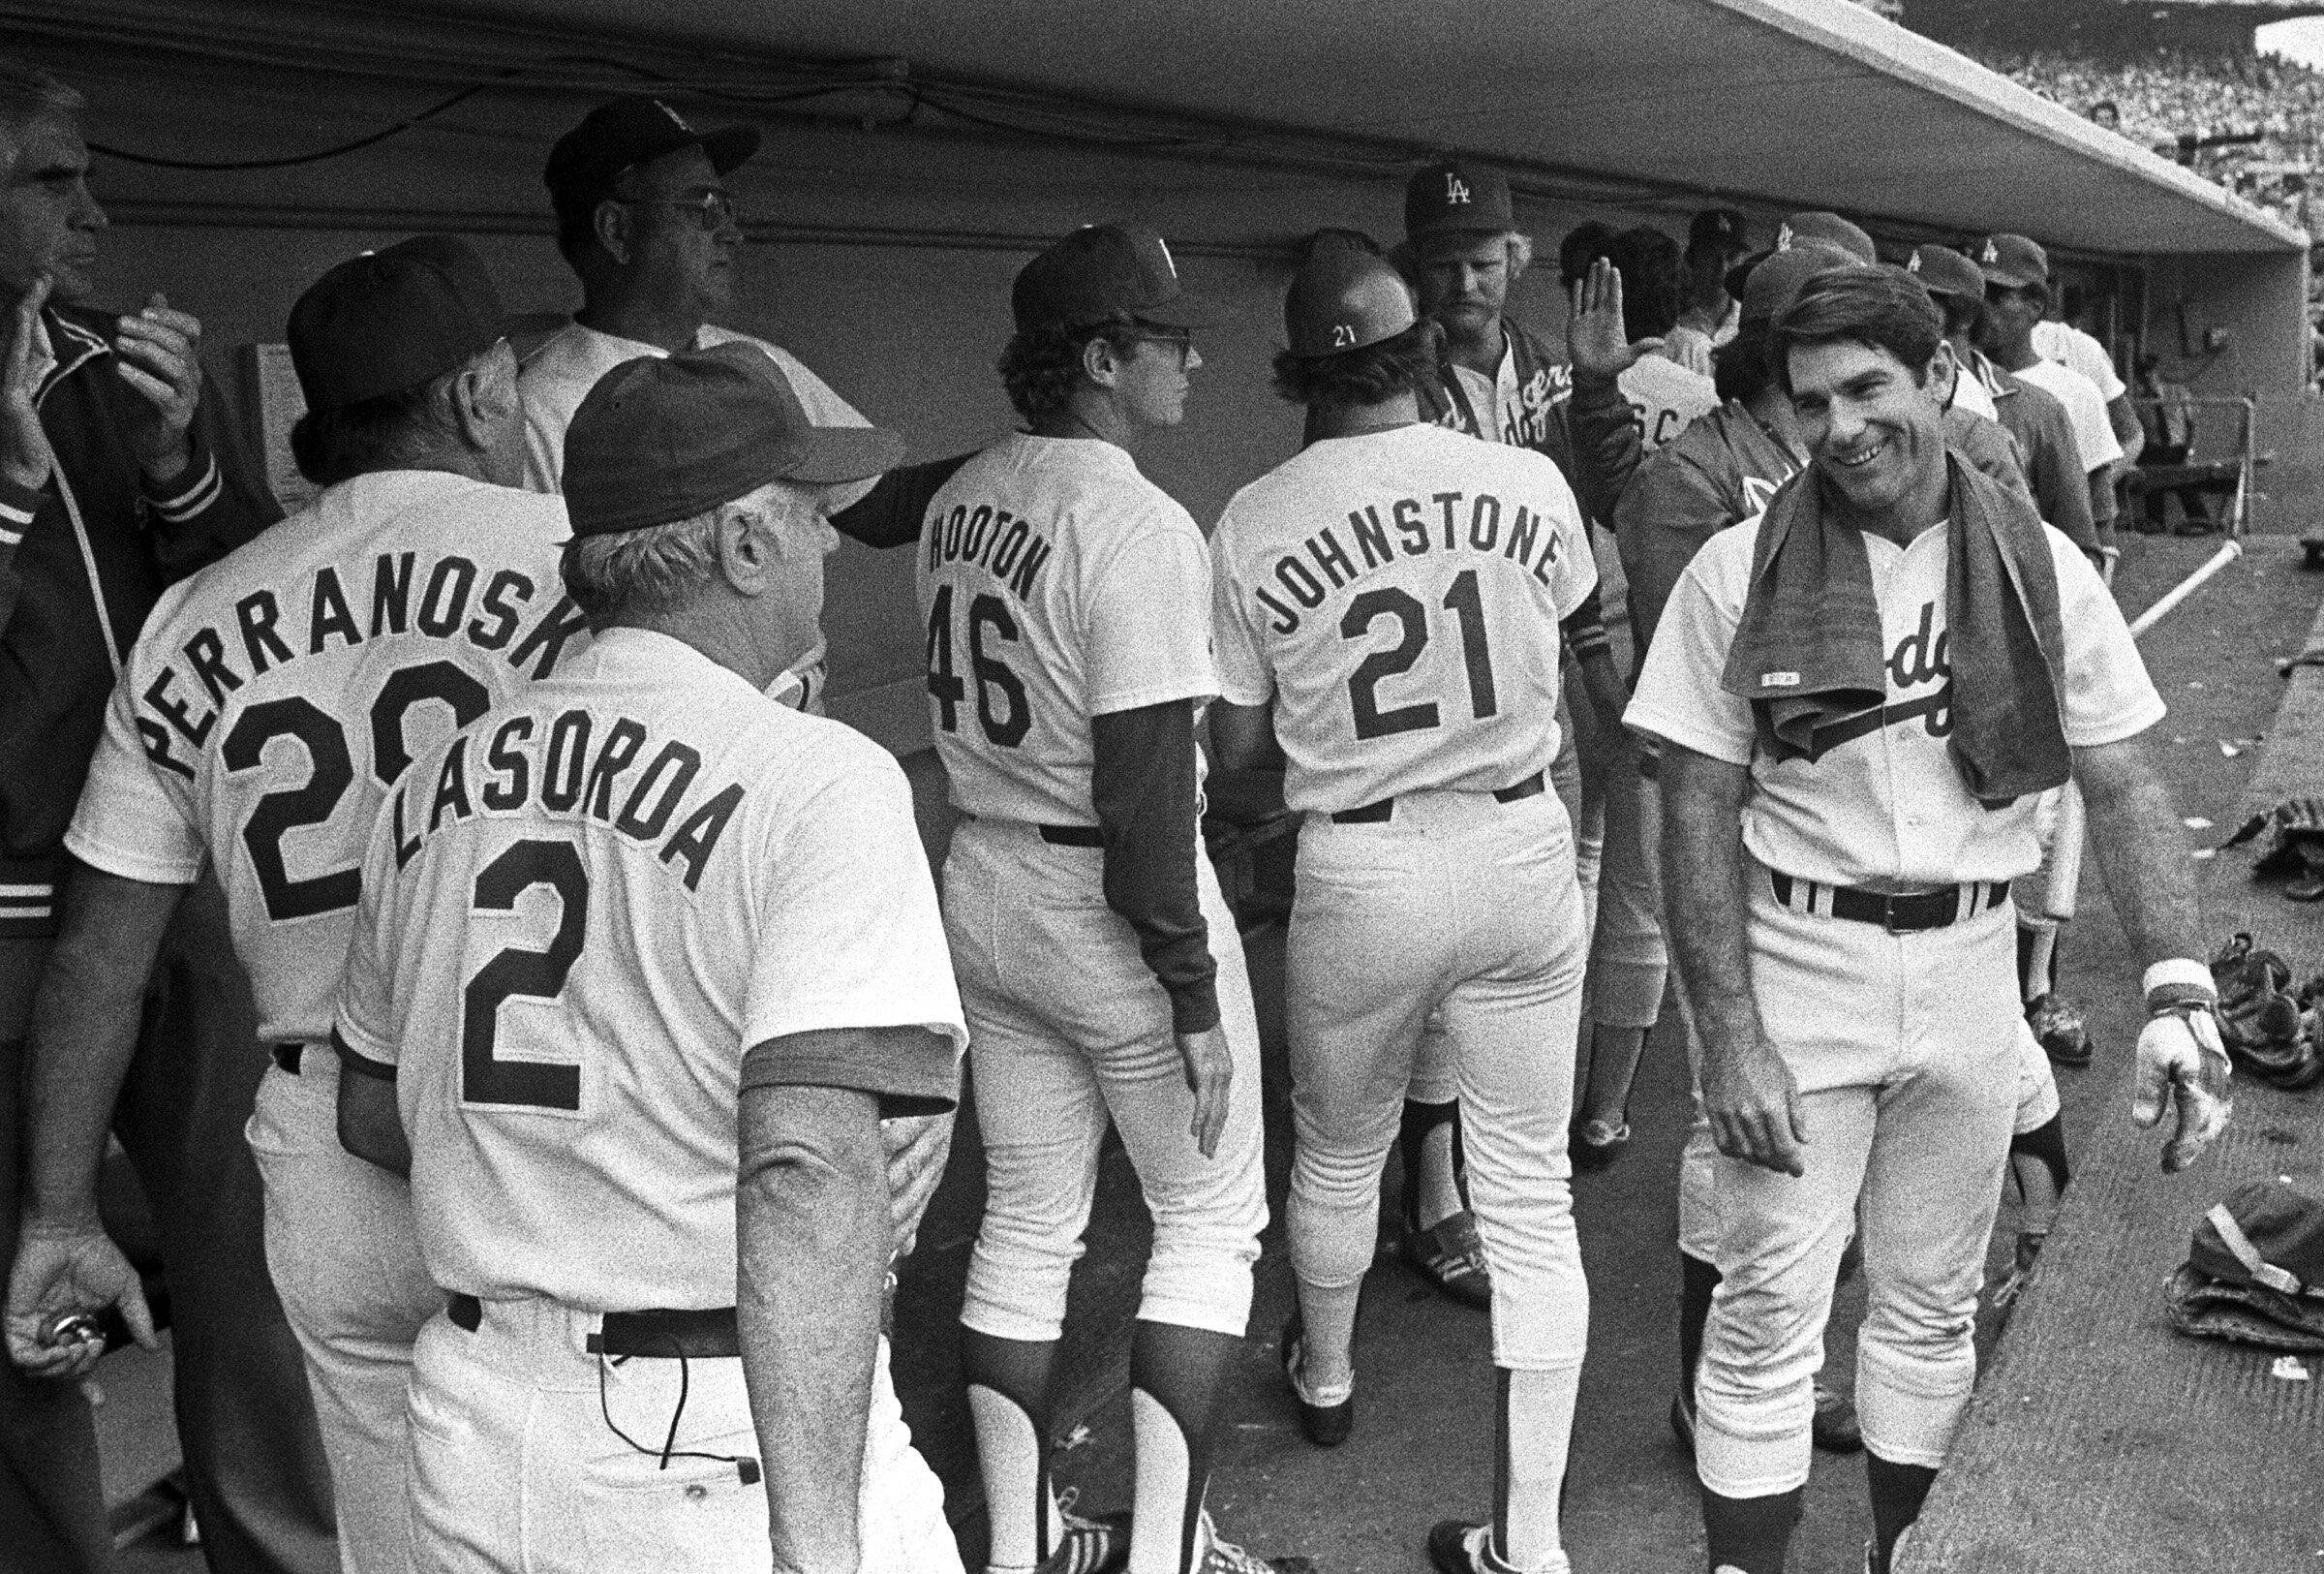  LOS ANGELES, CA - 1981: Manager Tommy Lasorda #2, Ron Perranoski #29, Burt Hooton #46, Jay Johnstone #21 and Steve Garvey #6   of the Los Angeles Dodgers in the dugout during the 1981 NLCS playoffs1981 at Dodger Stadium, Los Angeles, California. (Ph